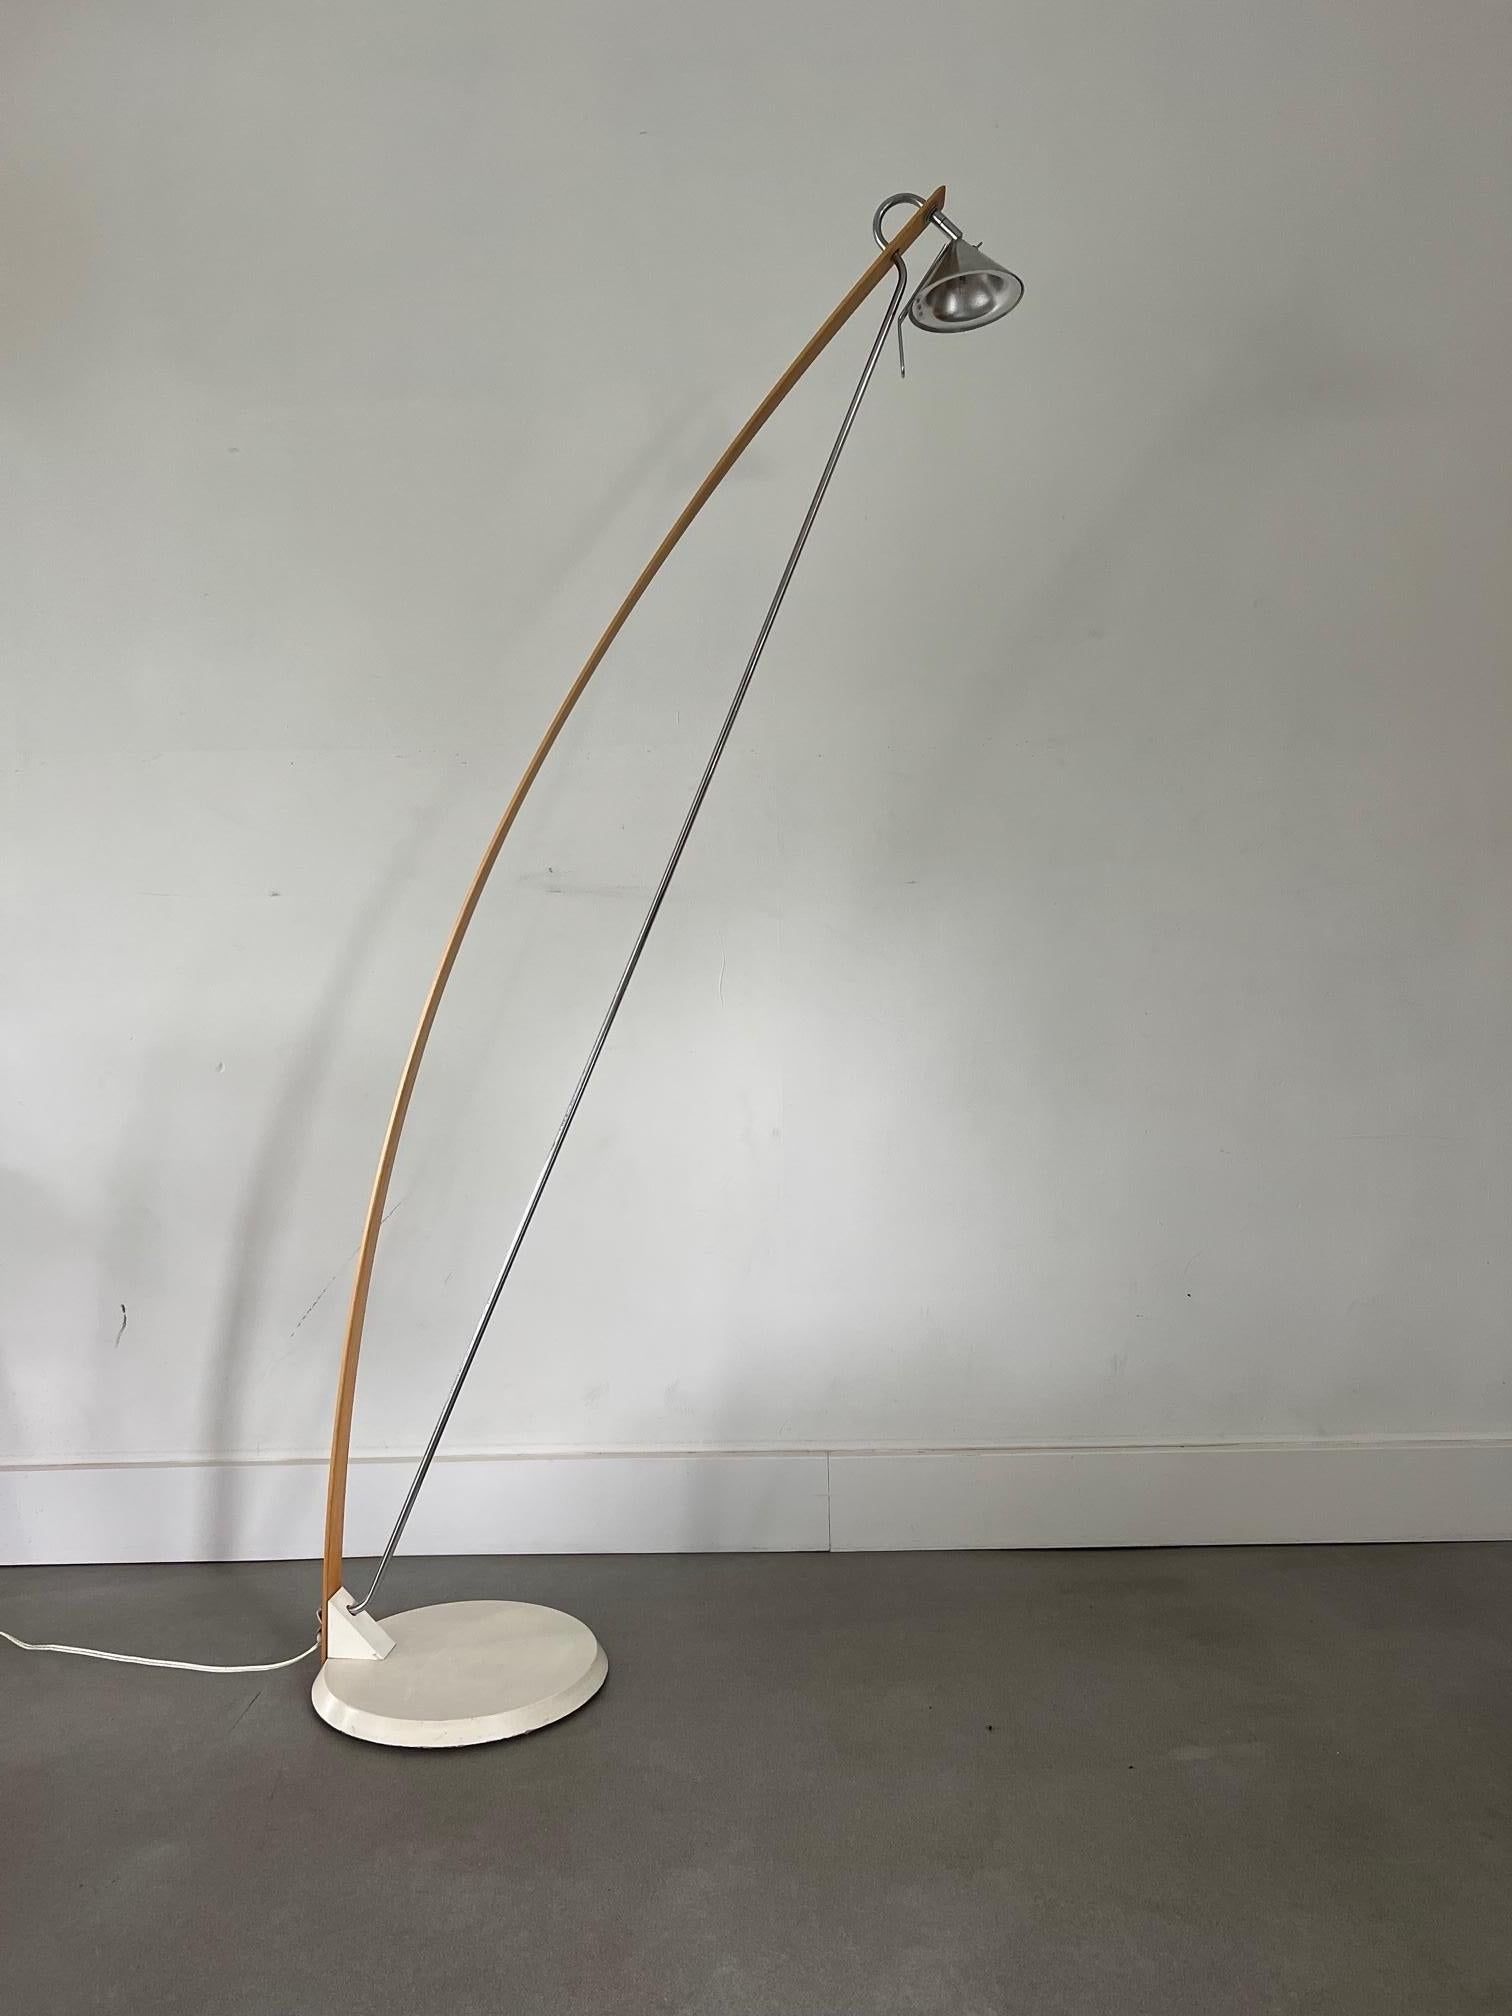 The Prolog floor lamp features a sleek and minimalist design, typical of Scandinavian aesthetics. It is known for its clean lines and functionality, making it a versatile addition to various interior styles. The lamp includes a slender metal stand,